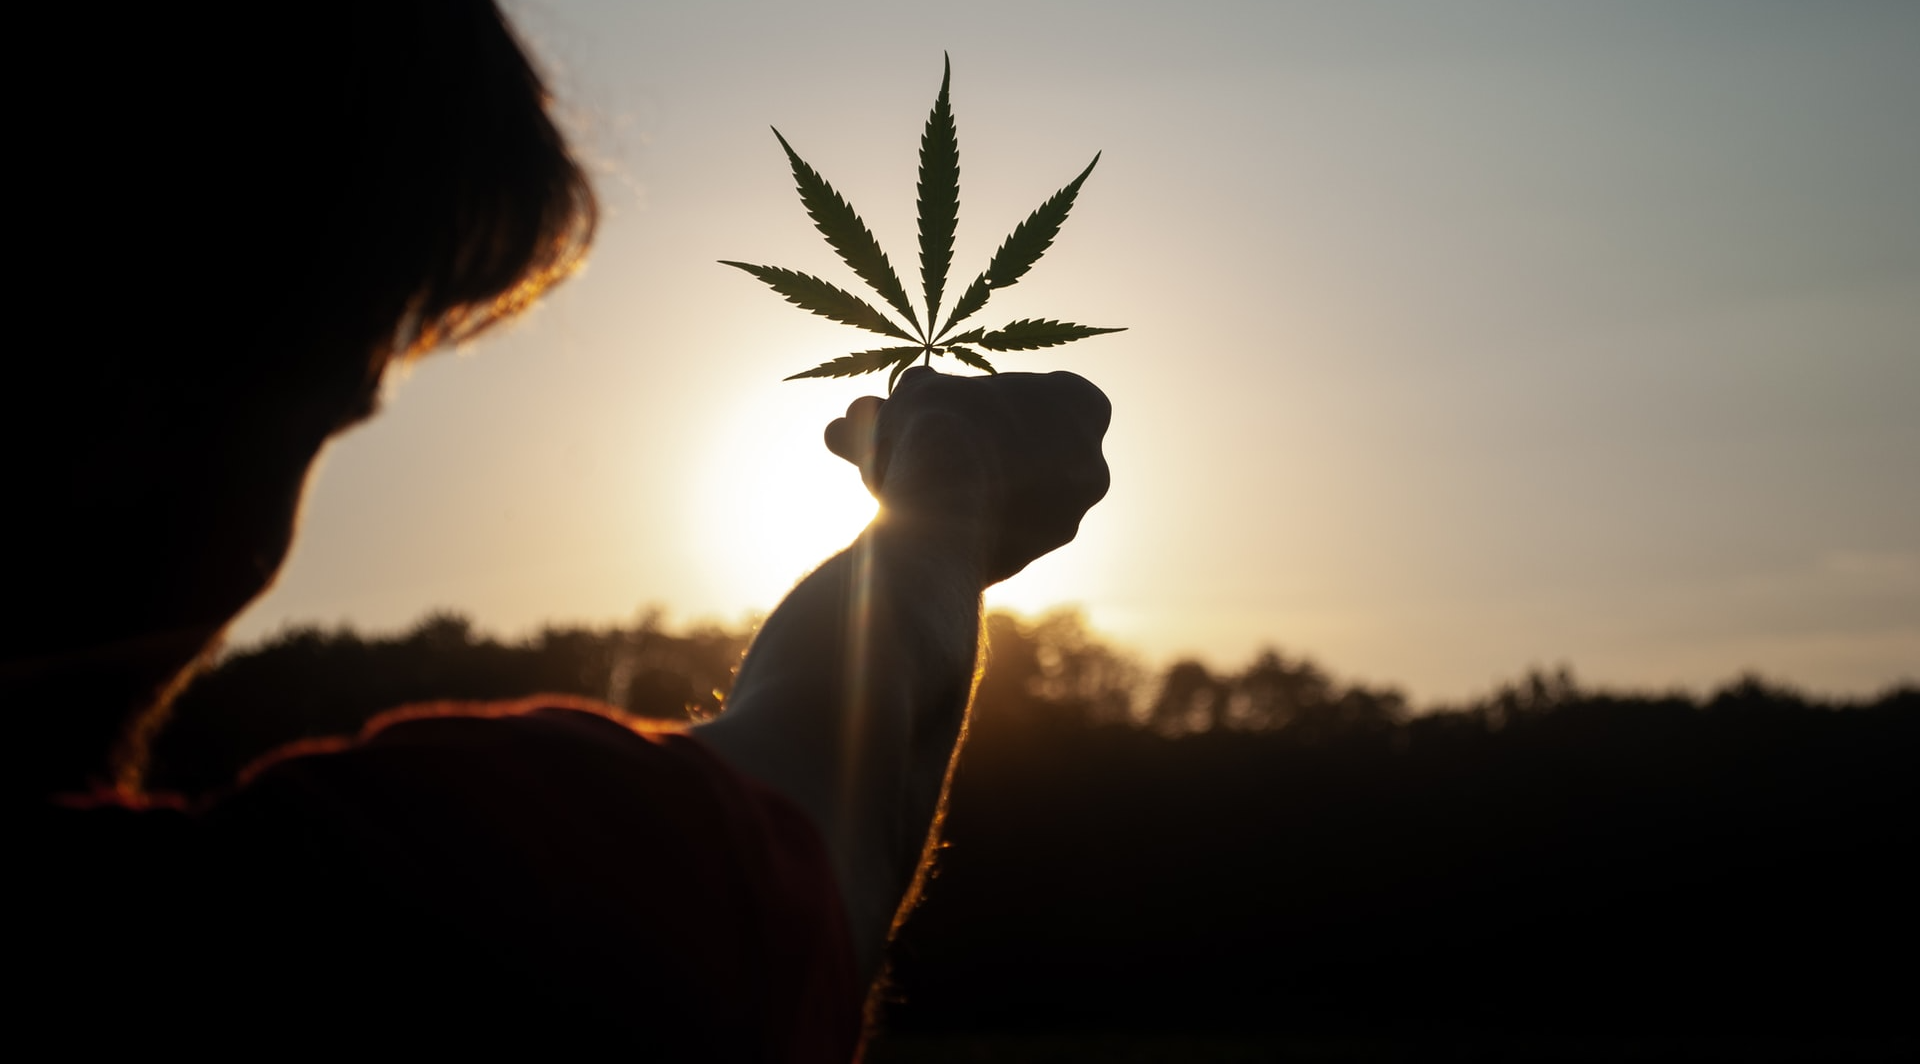 As the cannabis industry continues to evolve, guerilla marketing tactics have worked well, especially when more traditional methods won’t (or can’t) work.